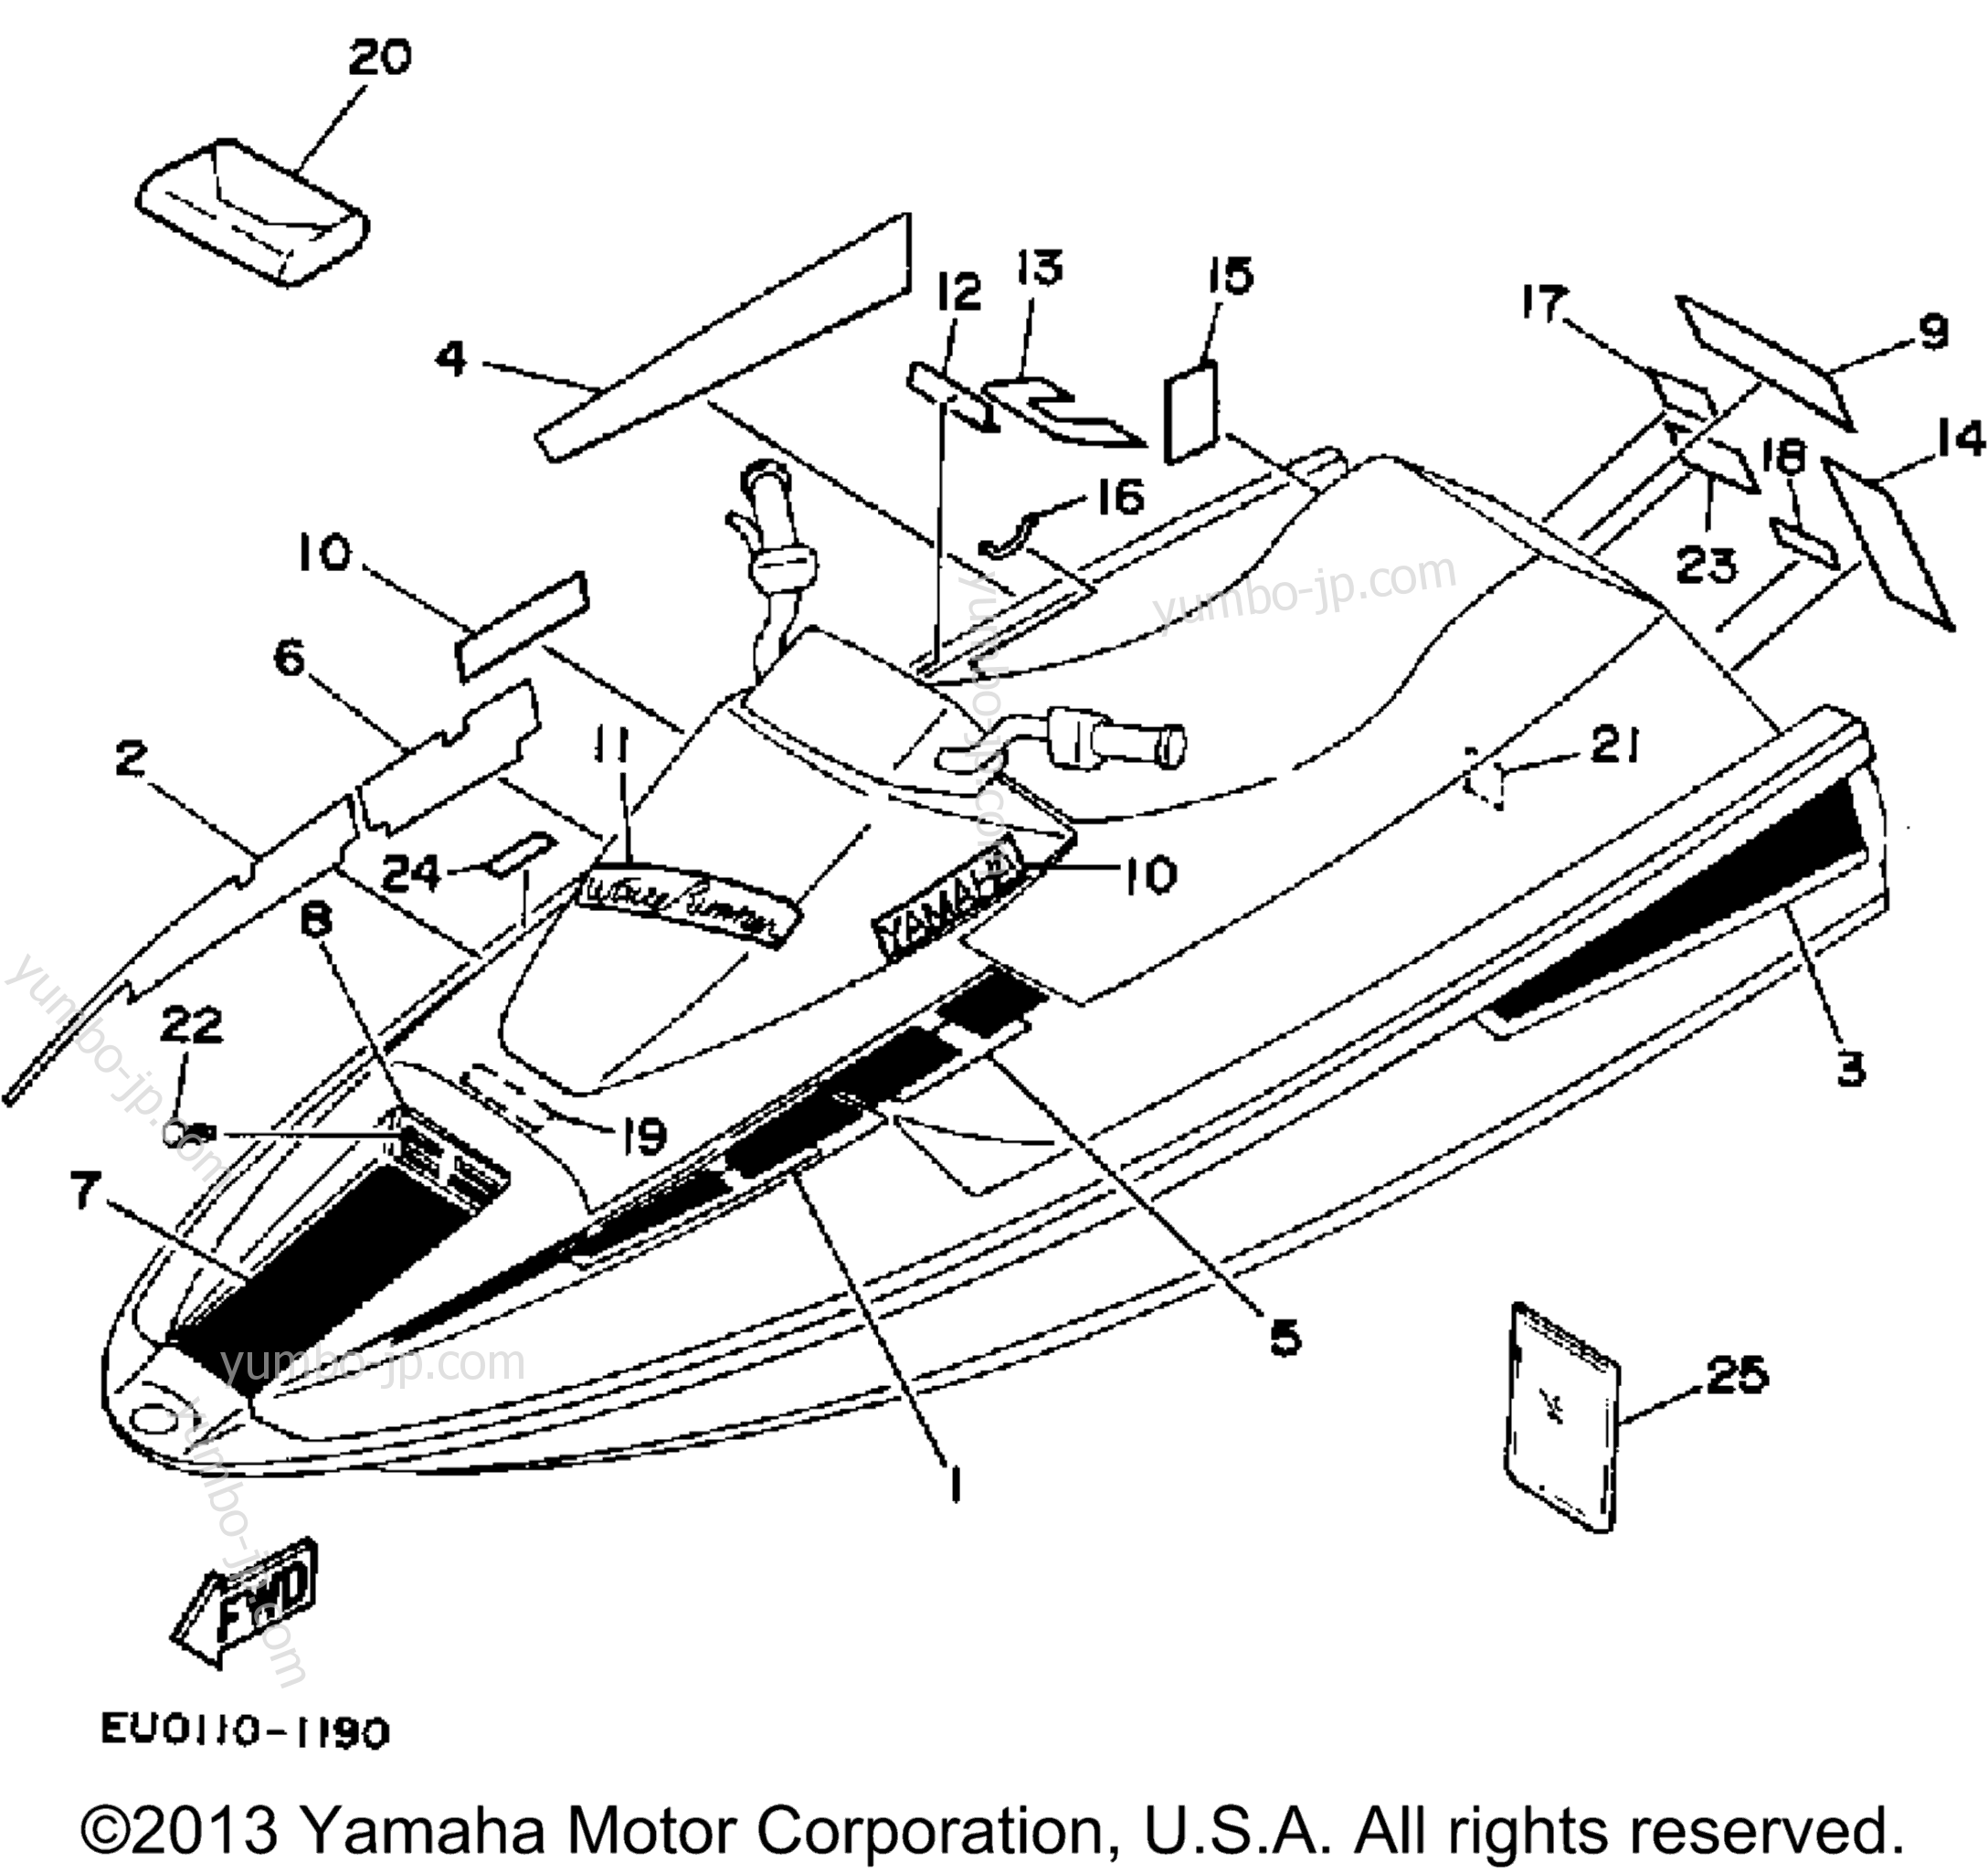 Graphic - Tool for watercrafts YAMAHA WAVE RUNNER (WR500P) 1991 year